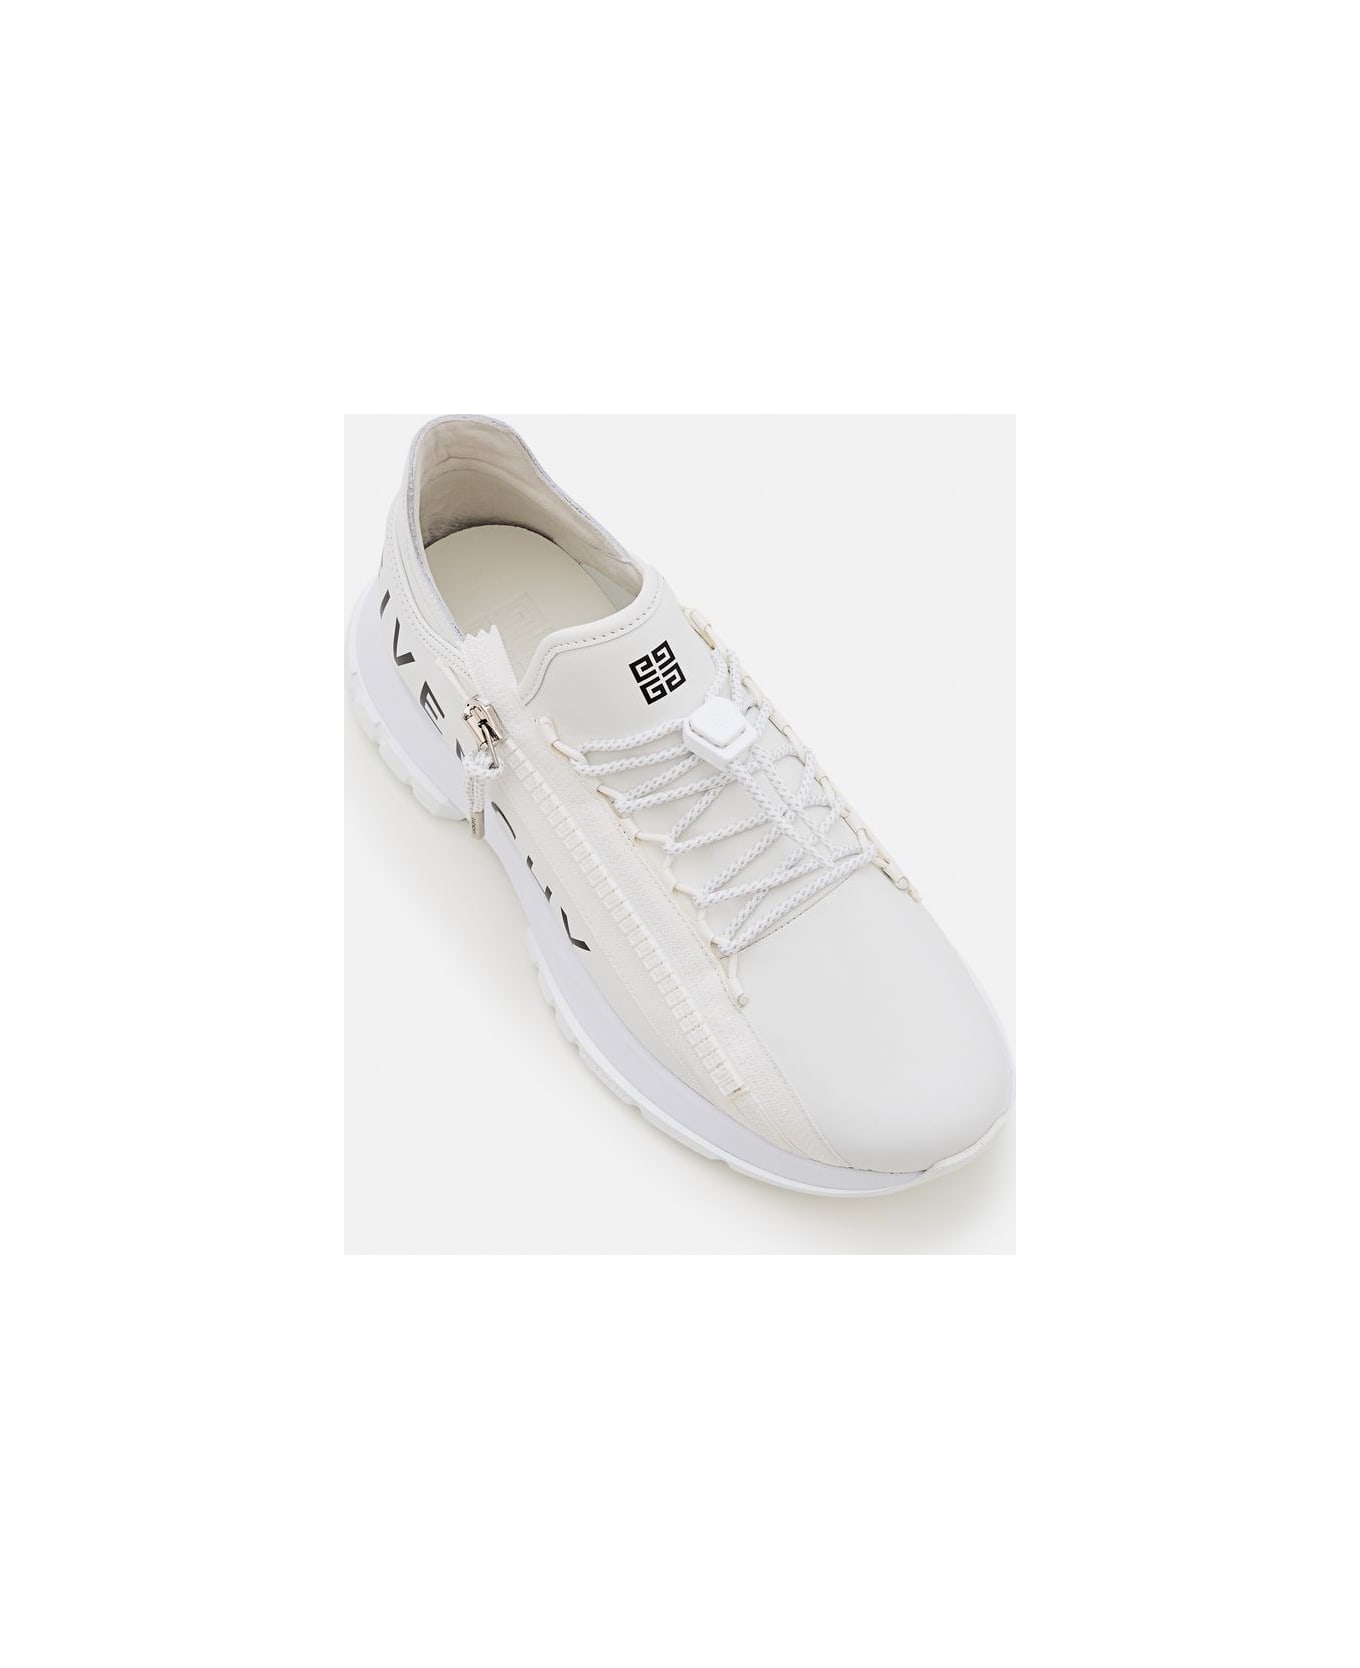 Givenchy Spectre Zip Sneaker - White